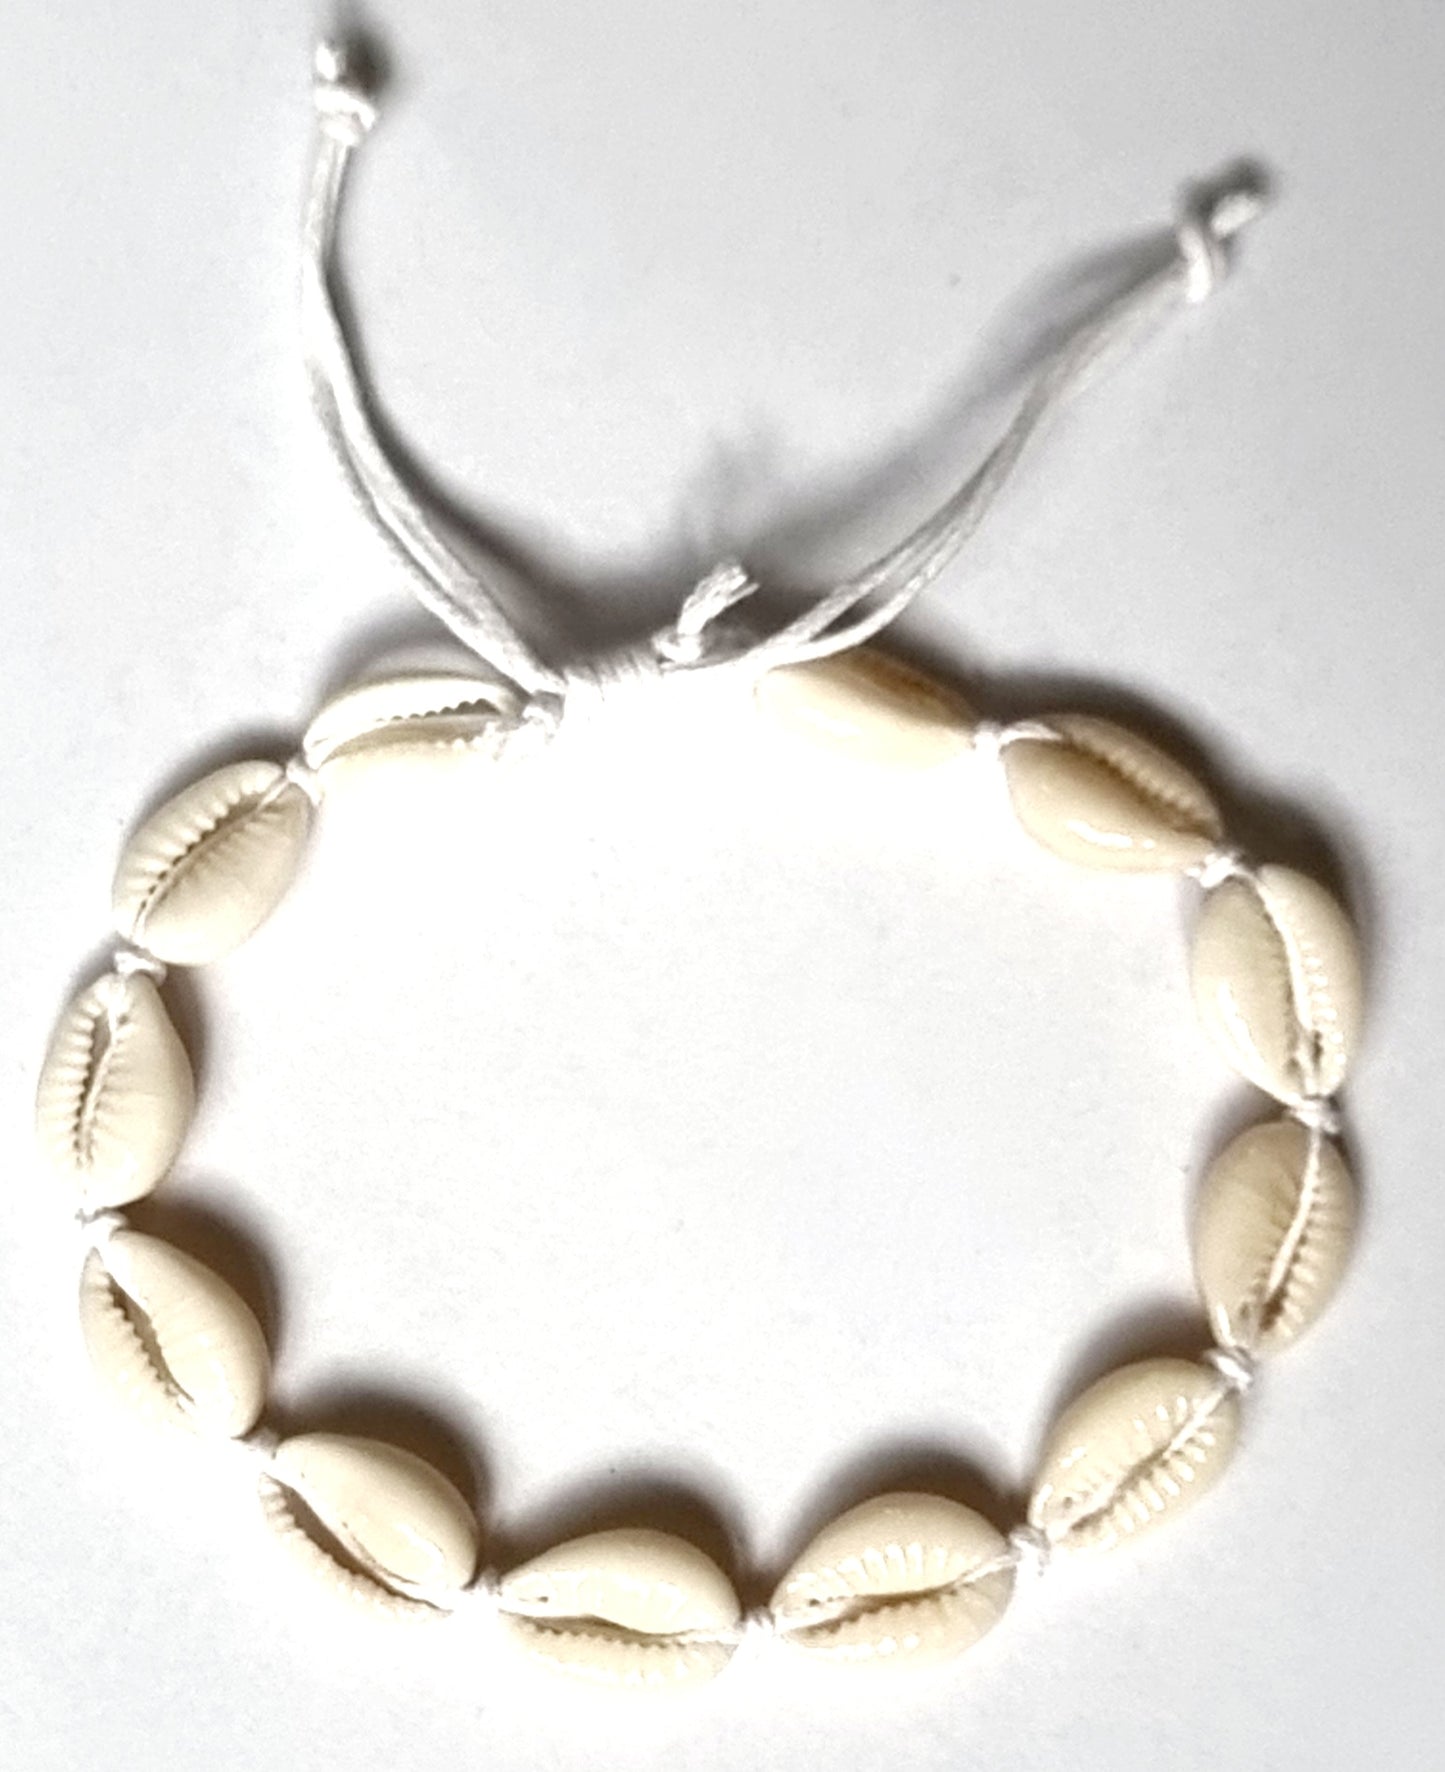 Anklet - Cowrie Shell